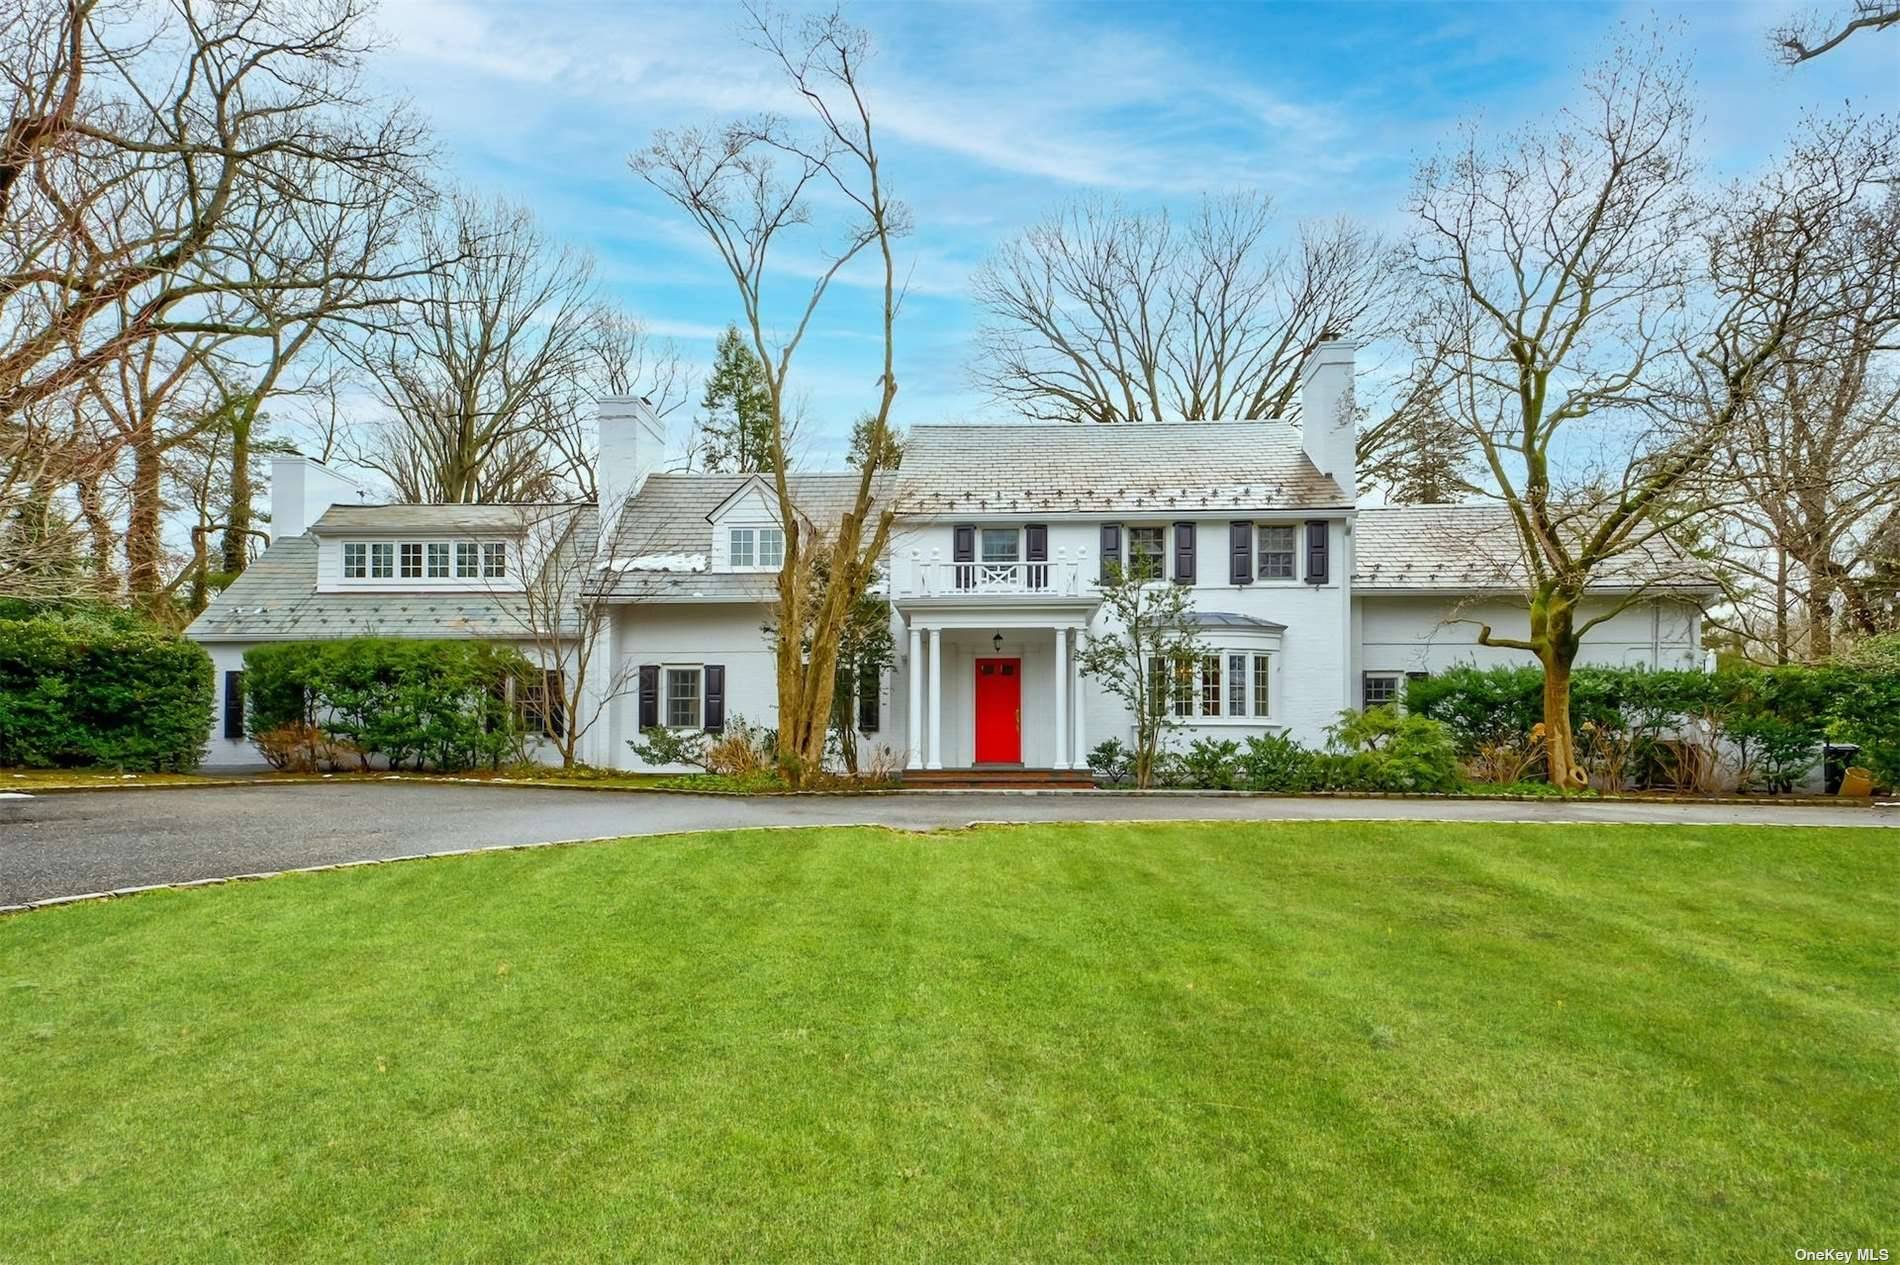 Located on beautiful and private Knolls Lane in Flower Hill, this 1937 Colonial, set on a shy 1.